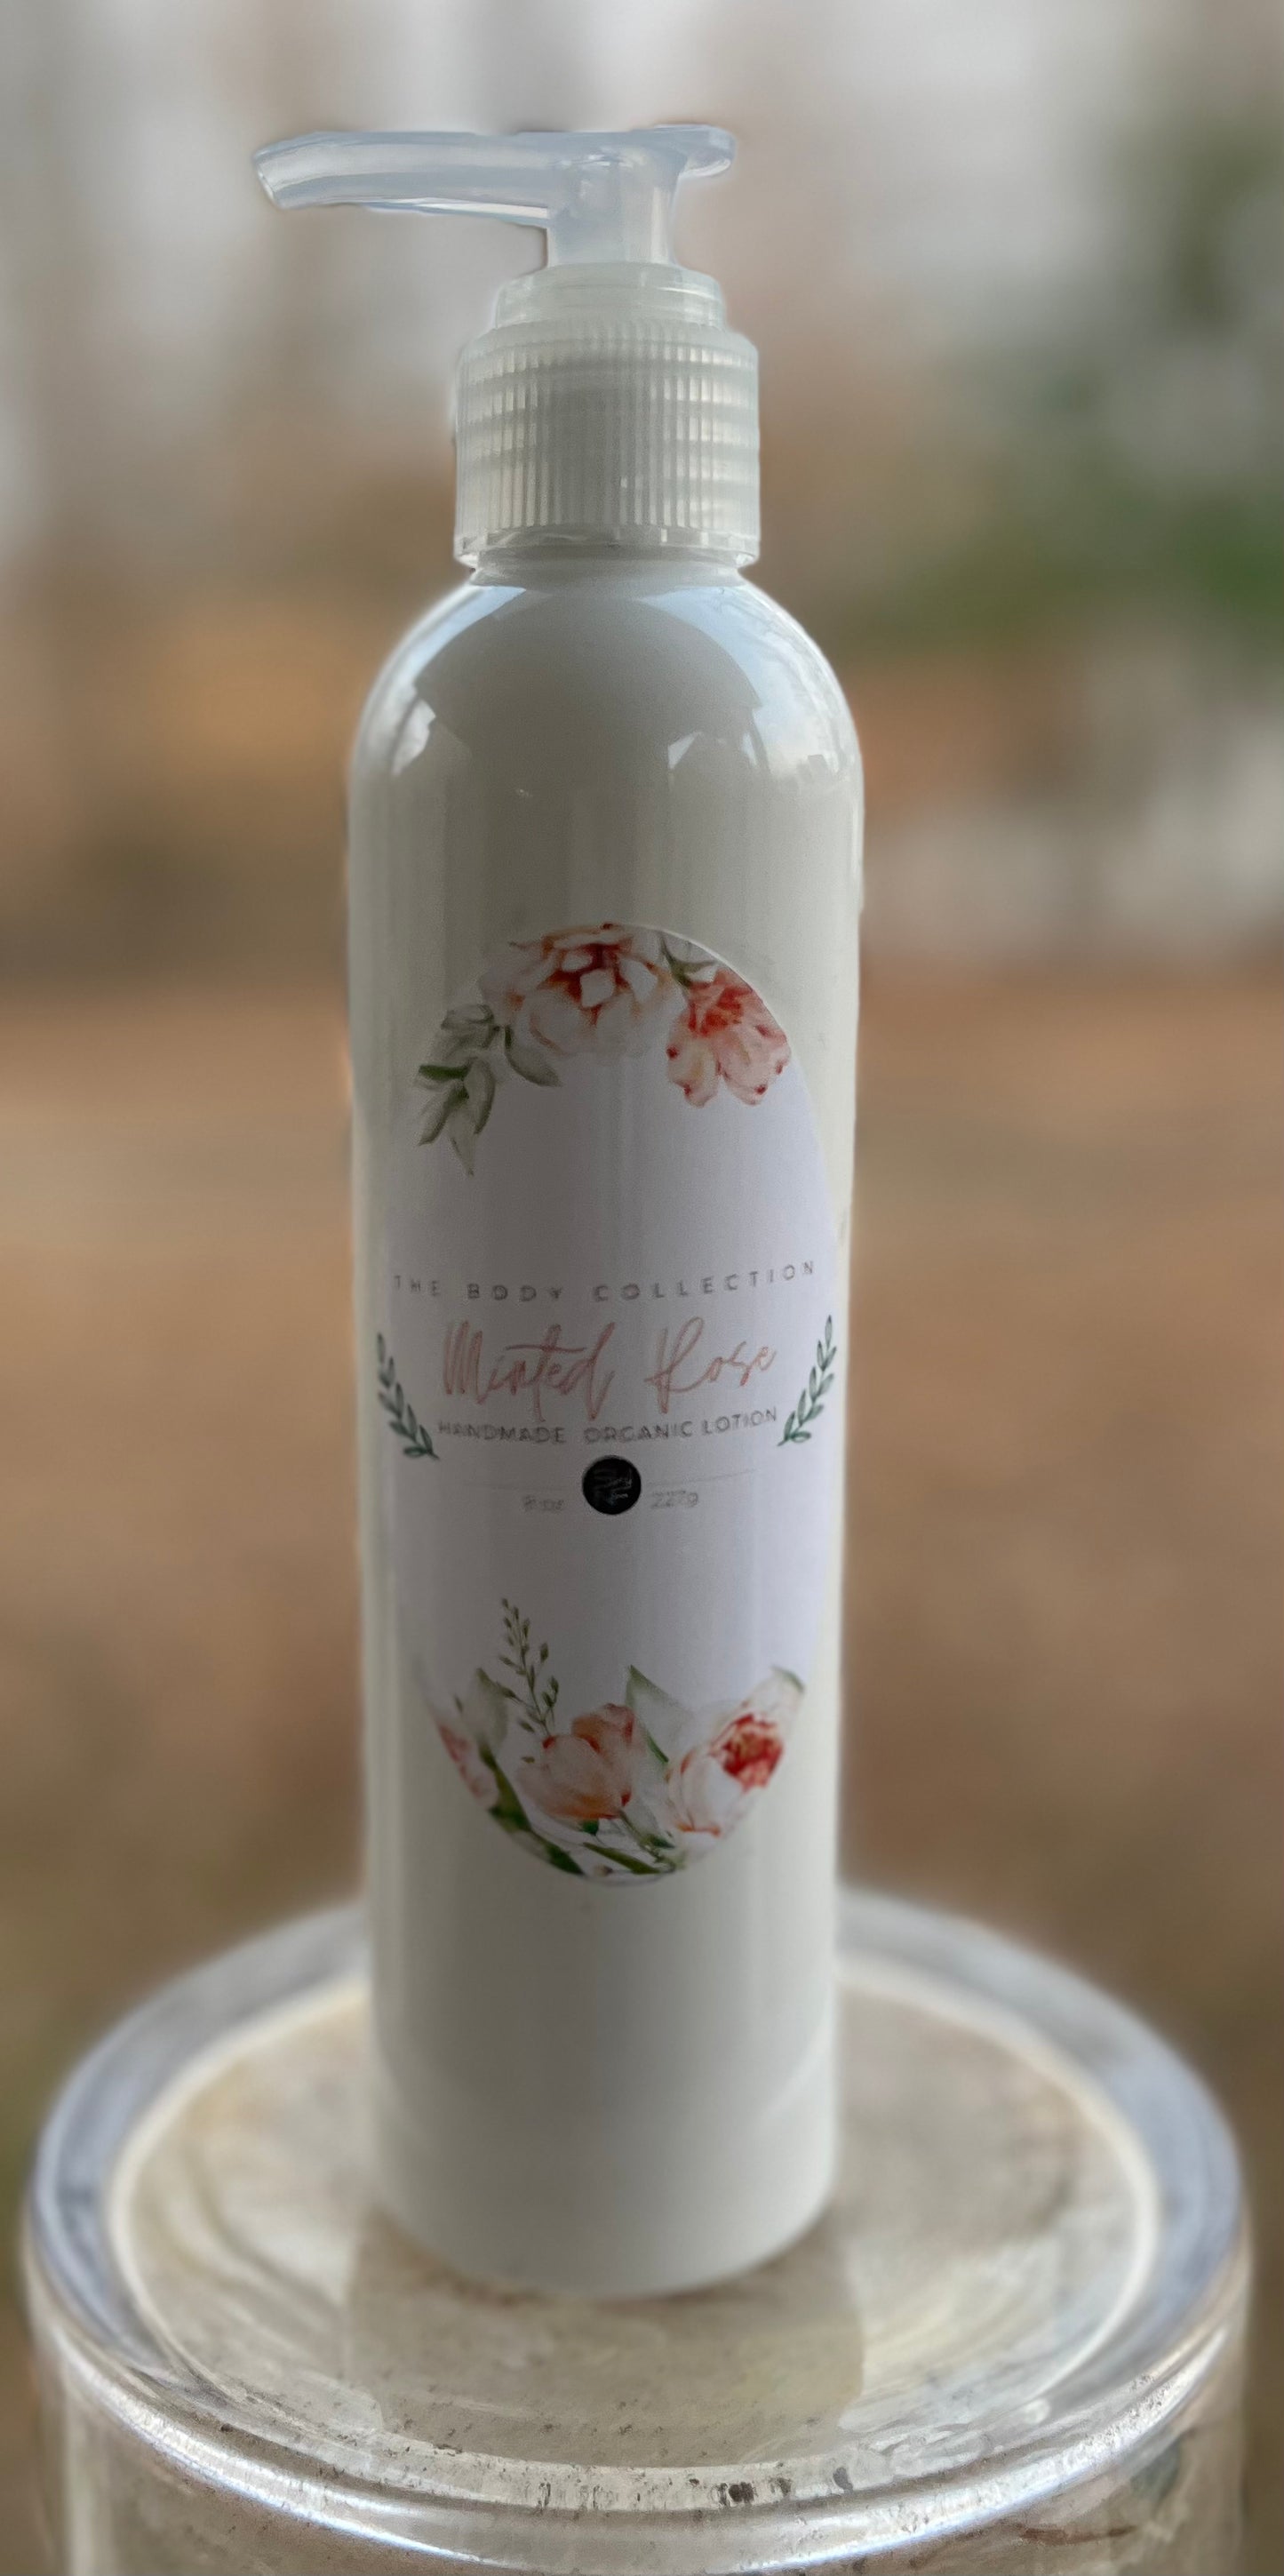 Minted Rose Body Lotion- She will not fail